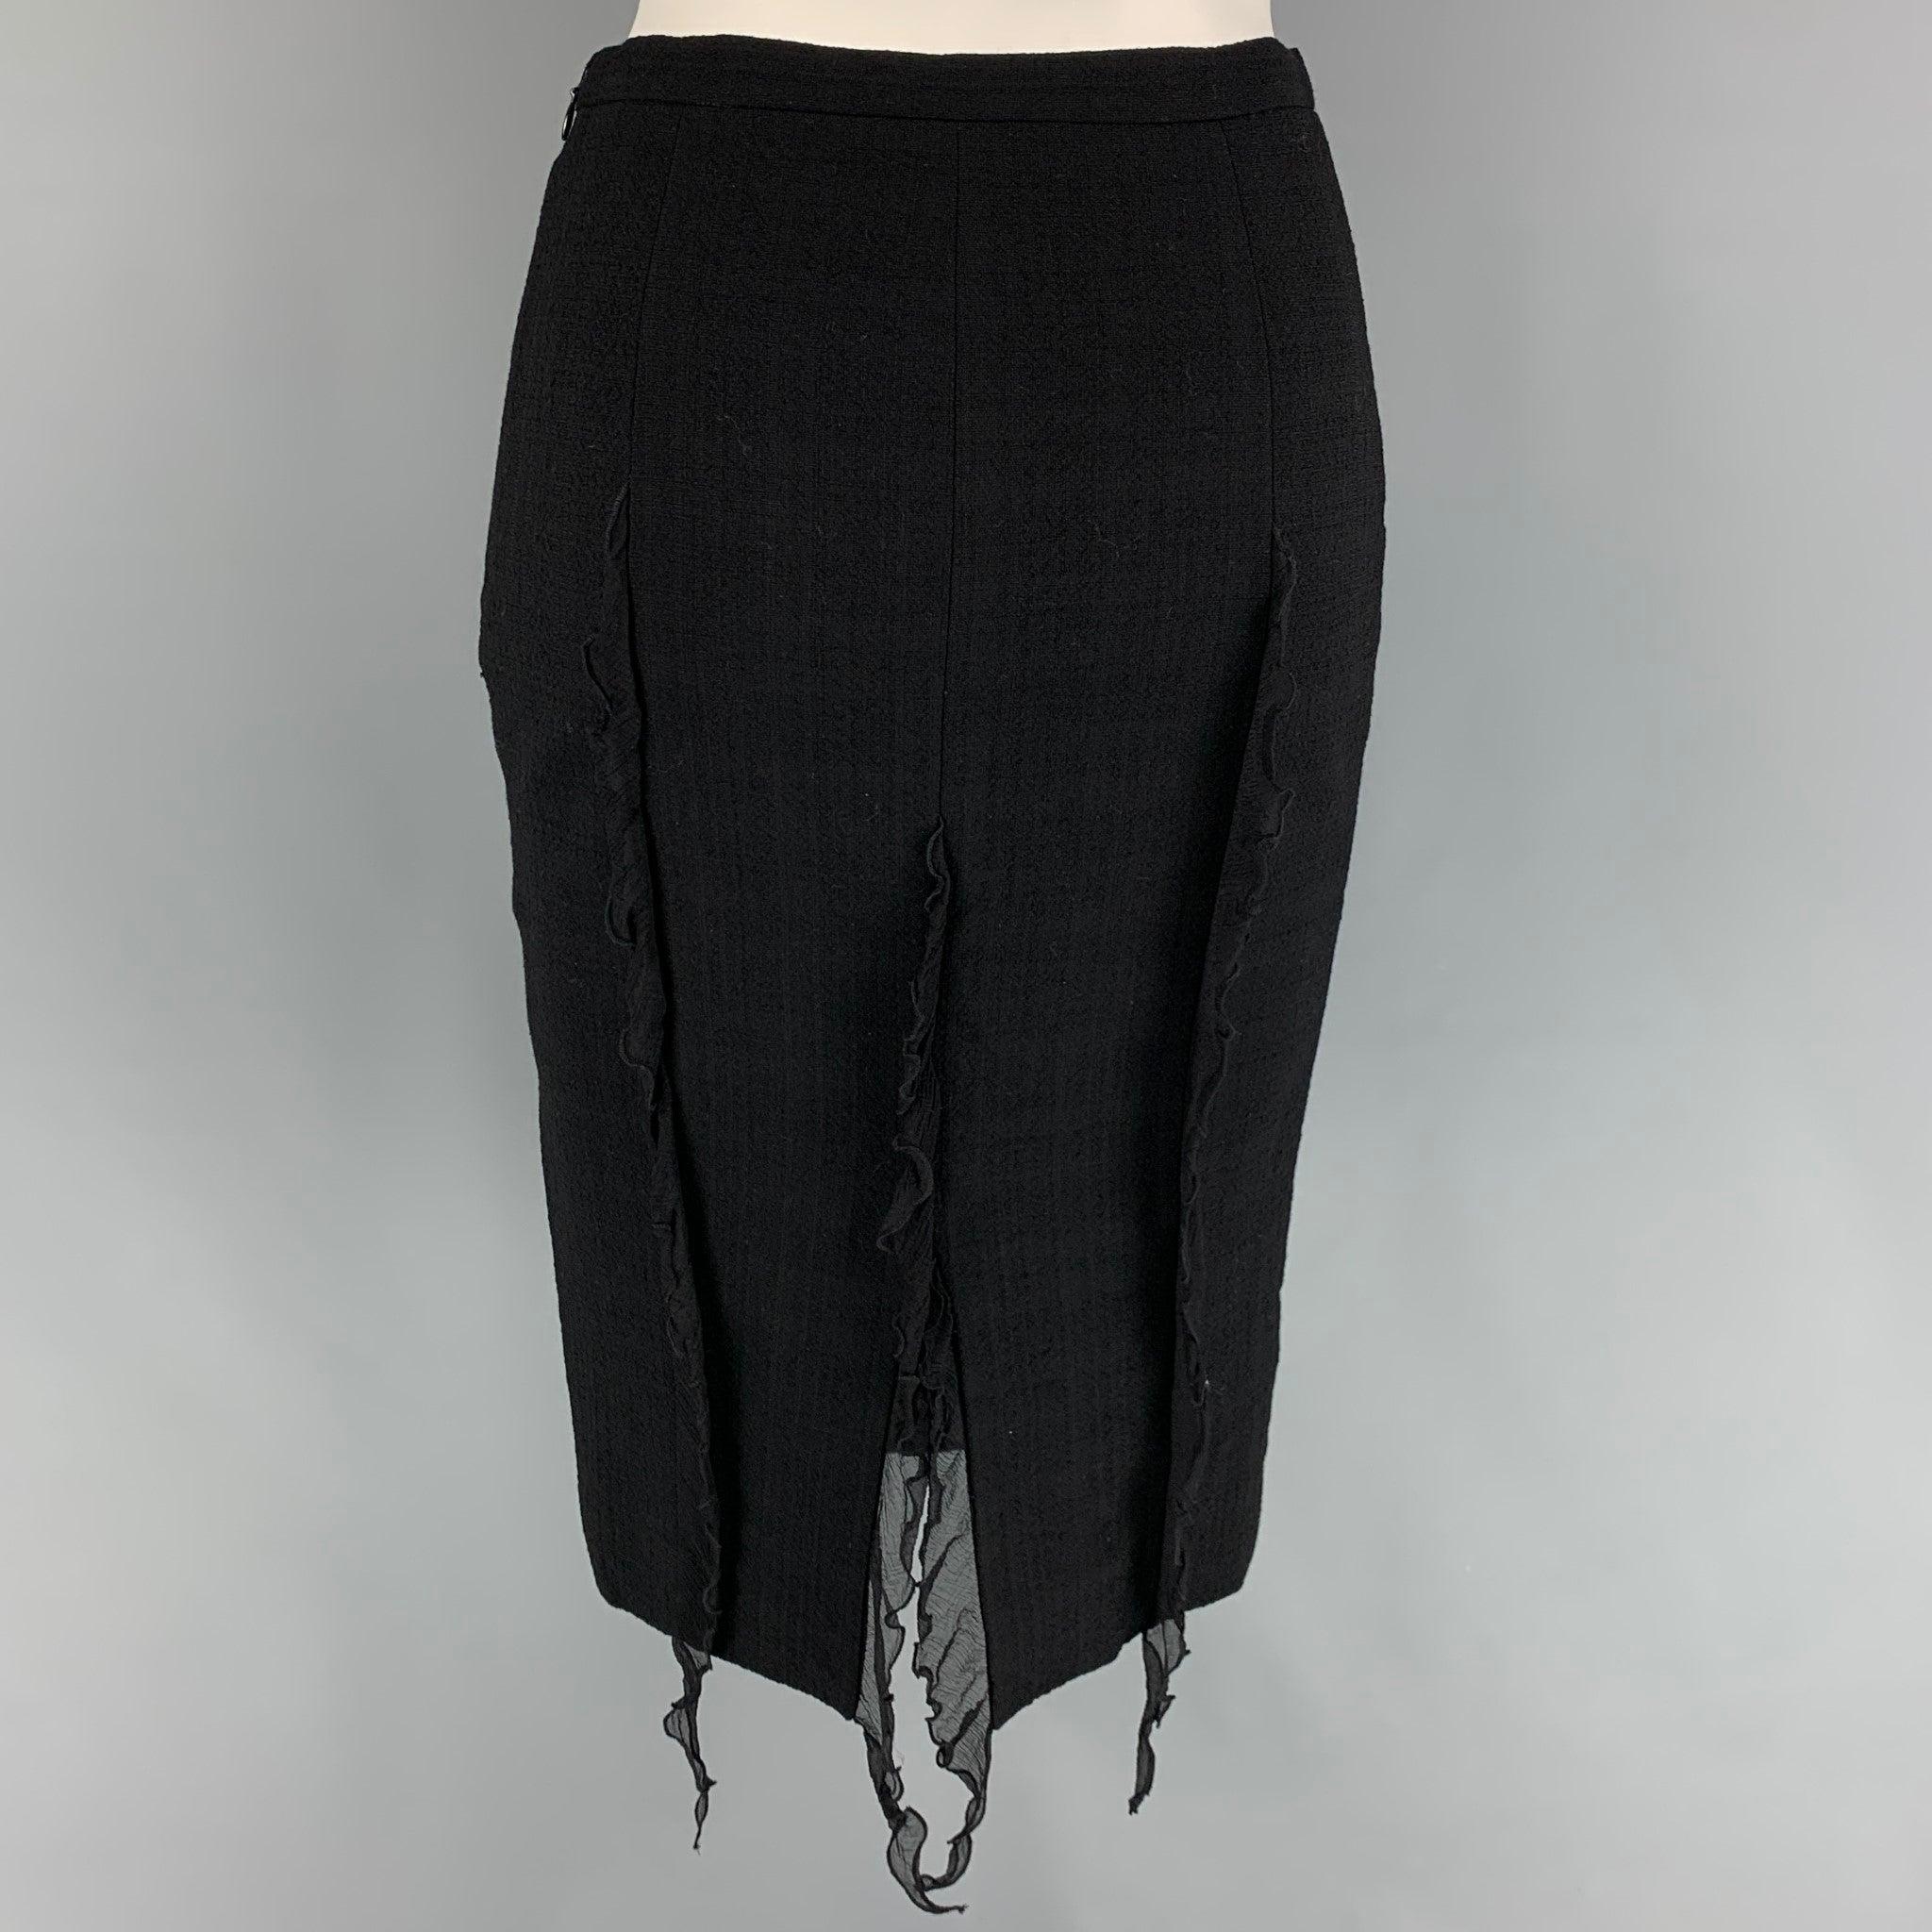 CHEAP AND CHIC by MOSCHINO Size 4 Black Silk Ruffled Pencil Below Knee Skirt In Good Condition For Sale In San Francisco, CA